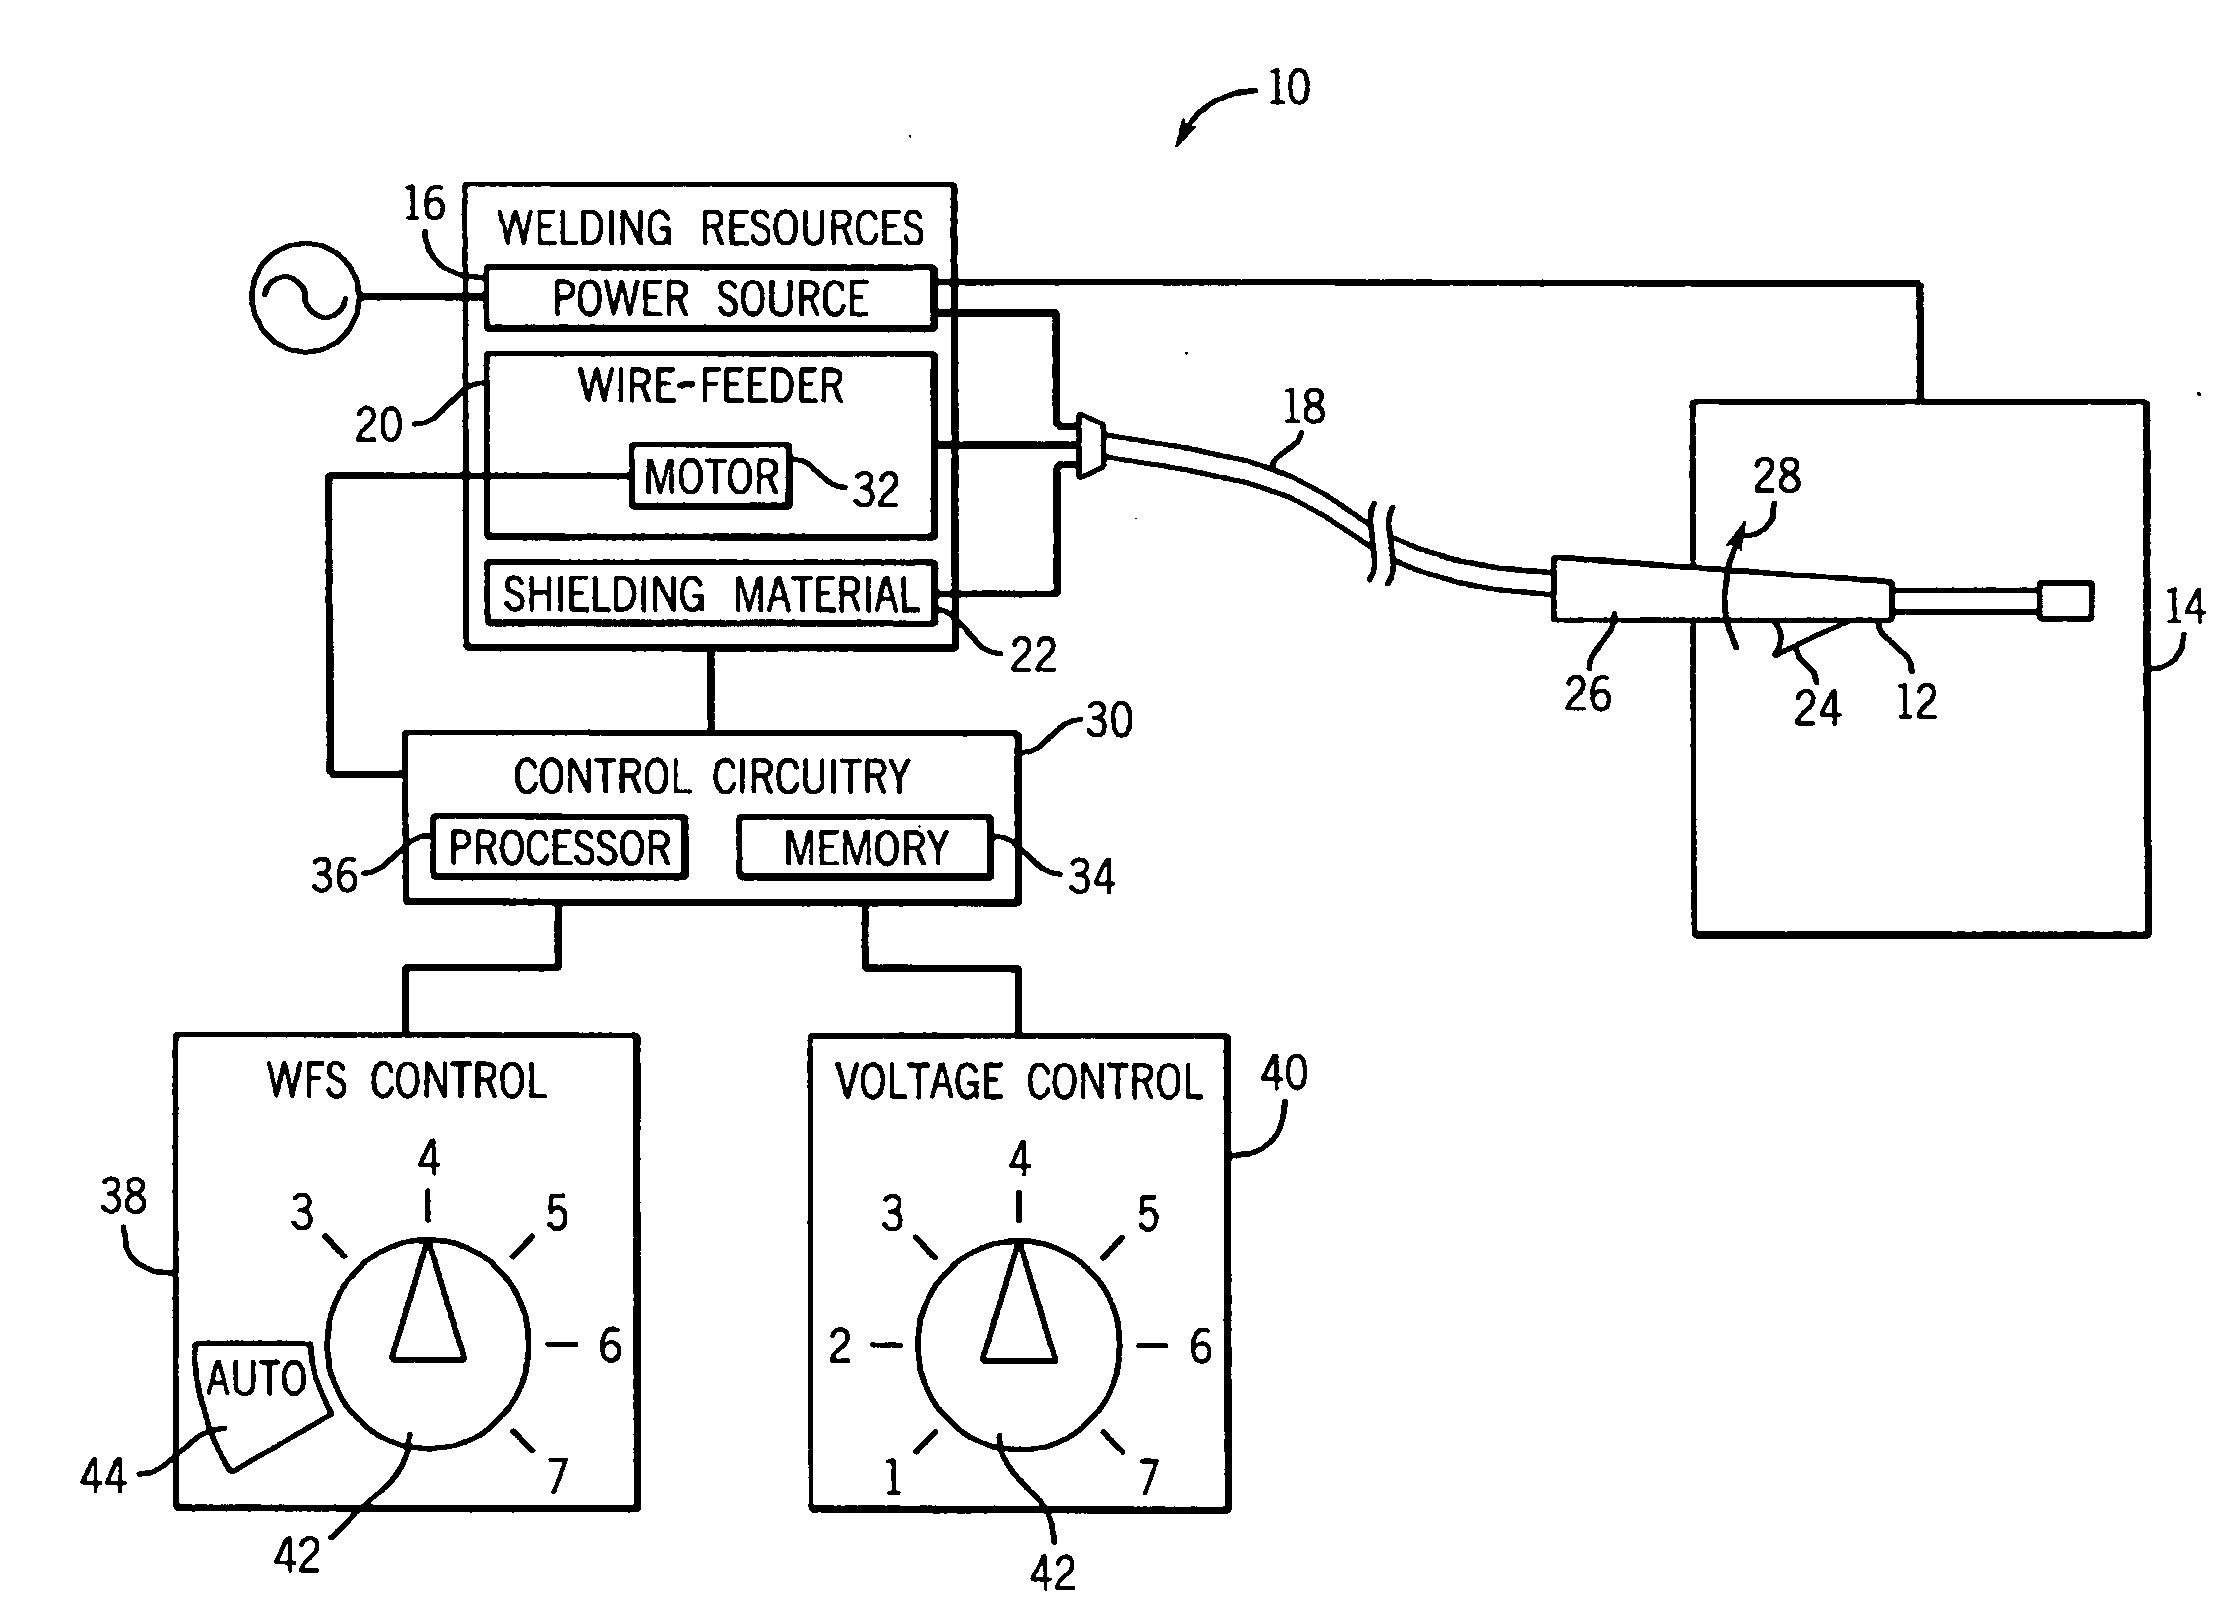 Welding wire feed speed control system method